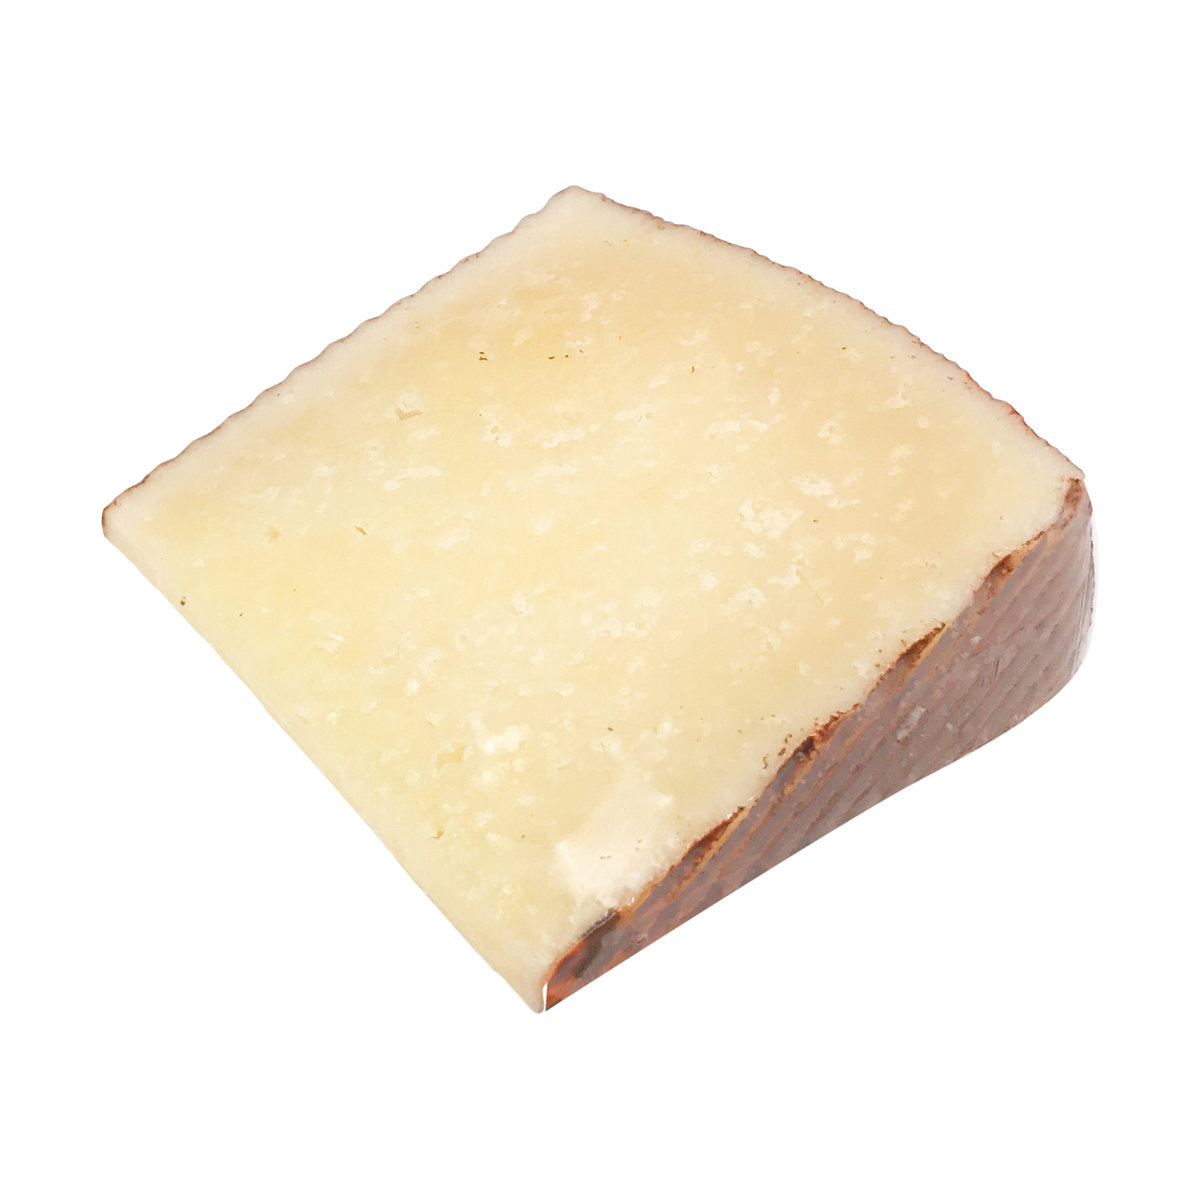 12 Month Old Manchego